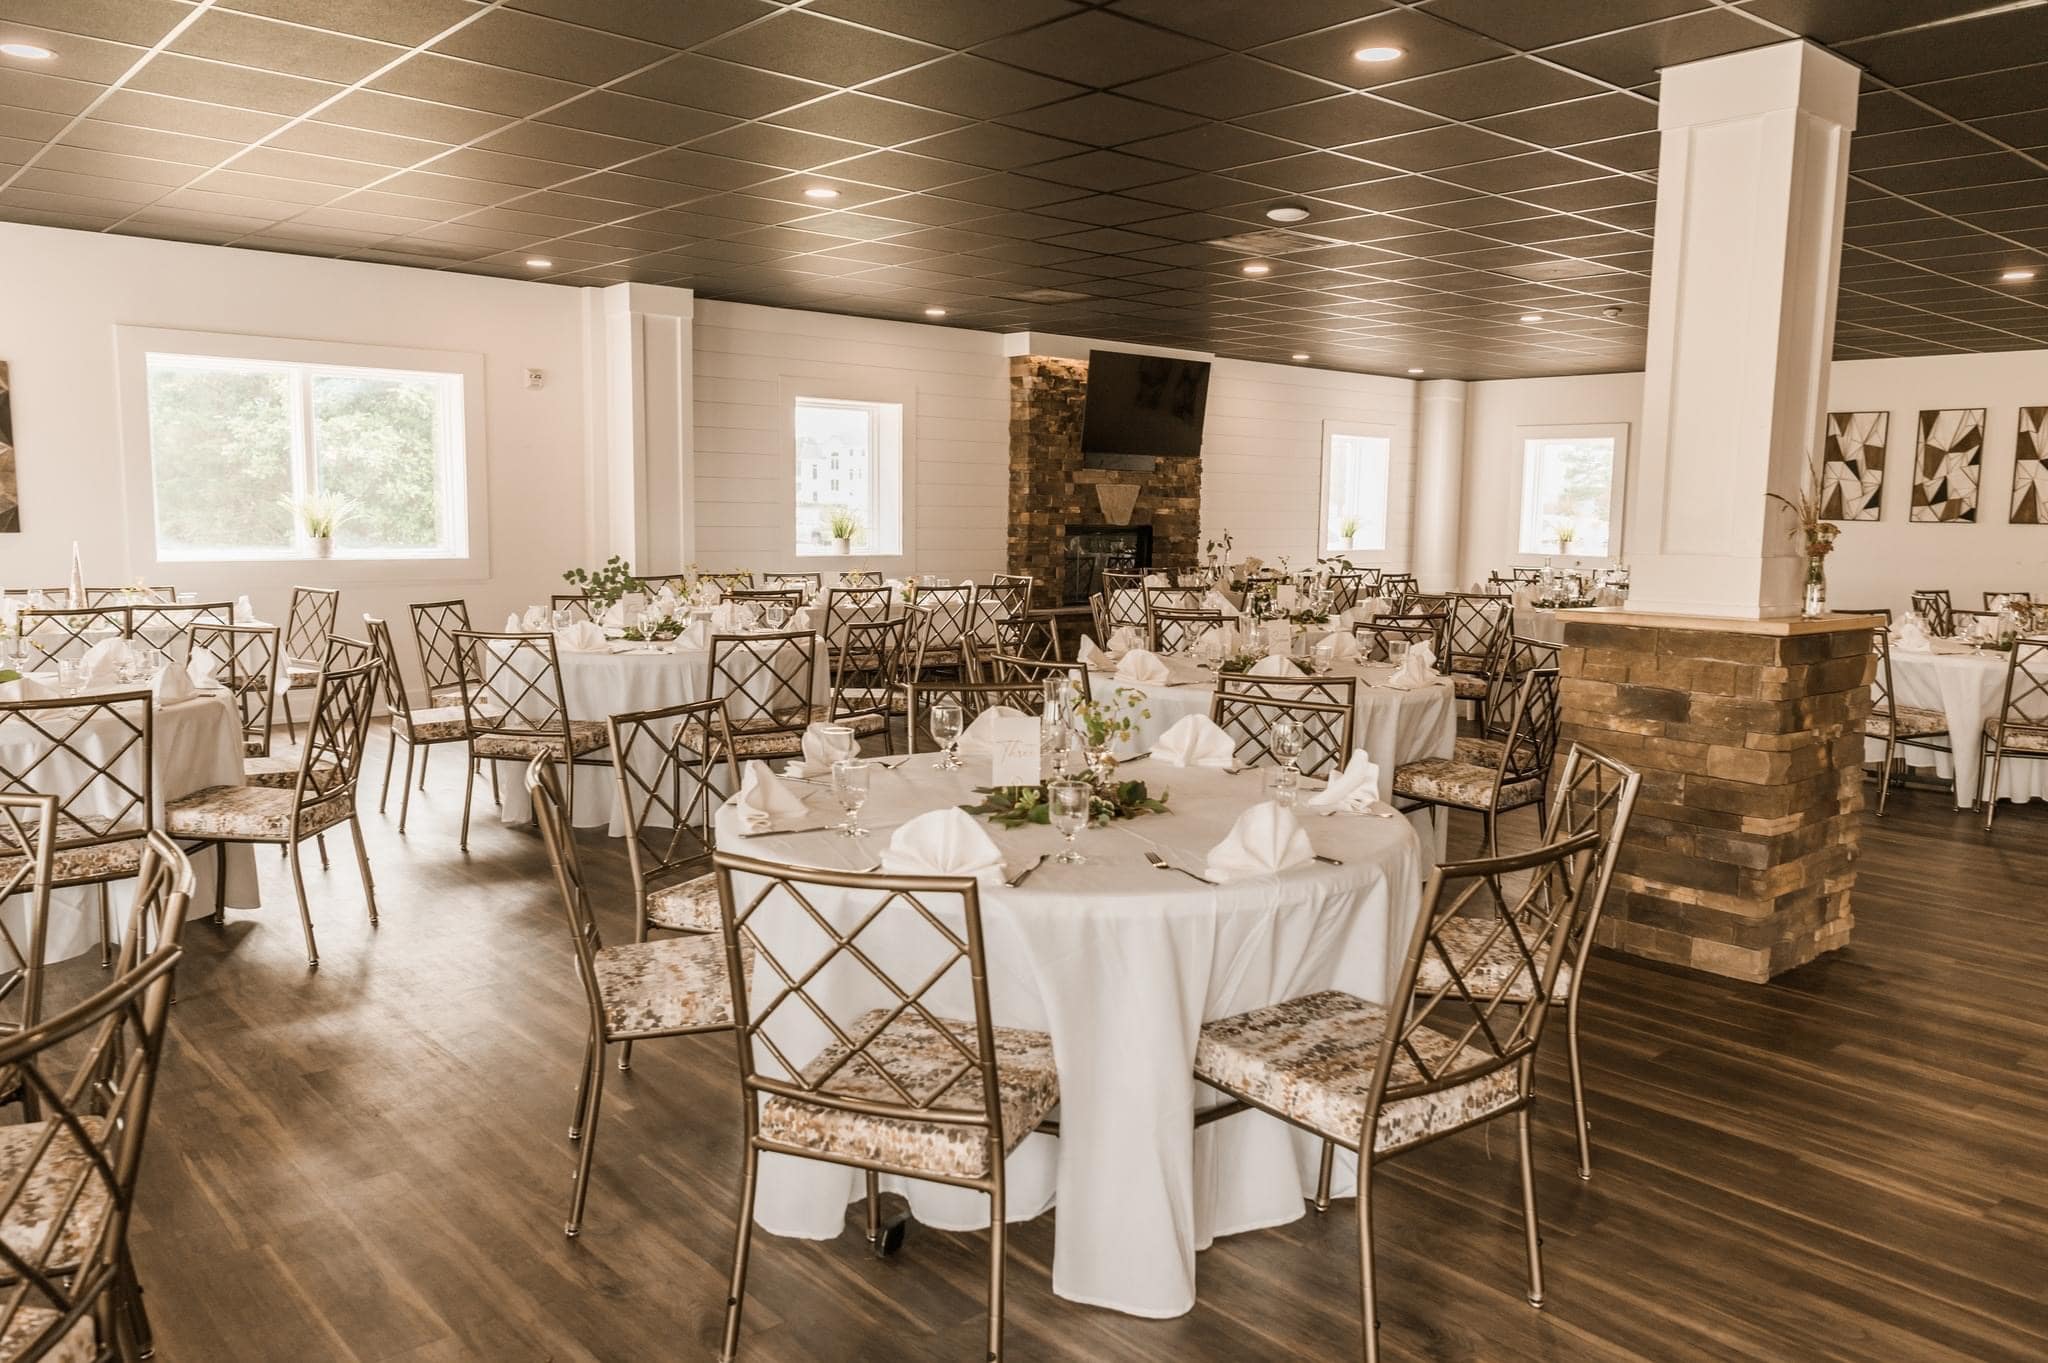 Dining room at the Ocean City Golf Club set for a wedding